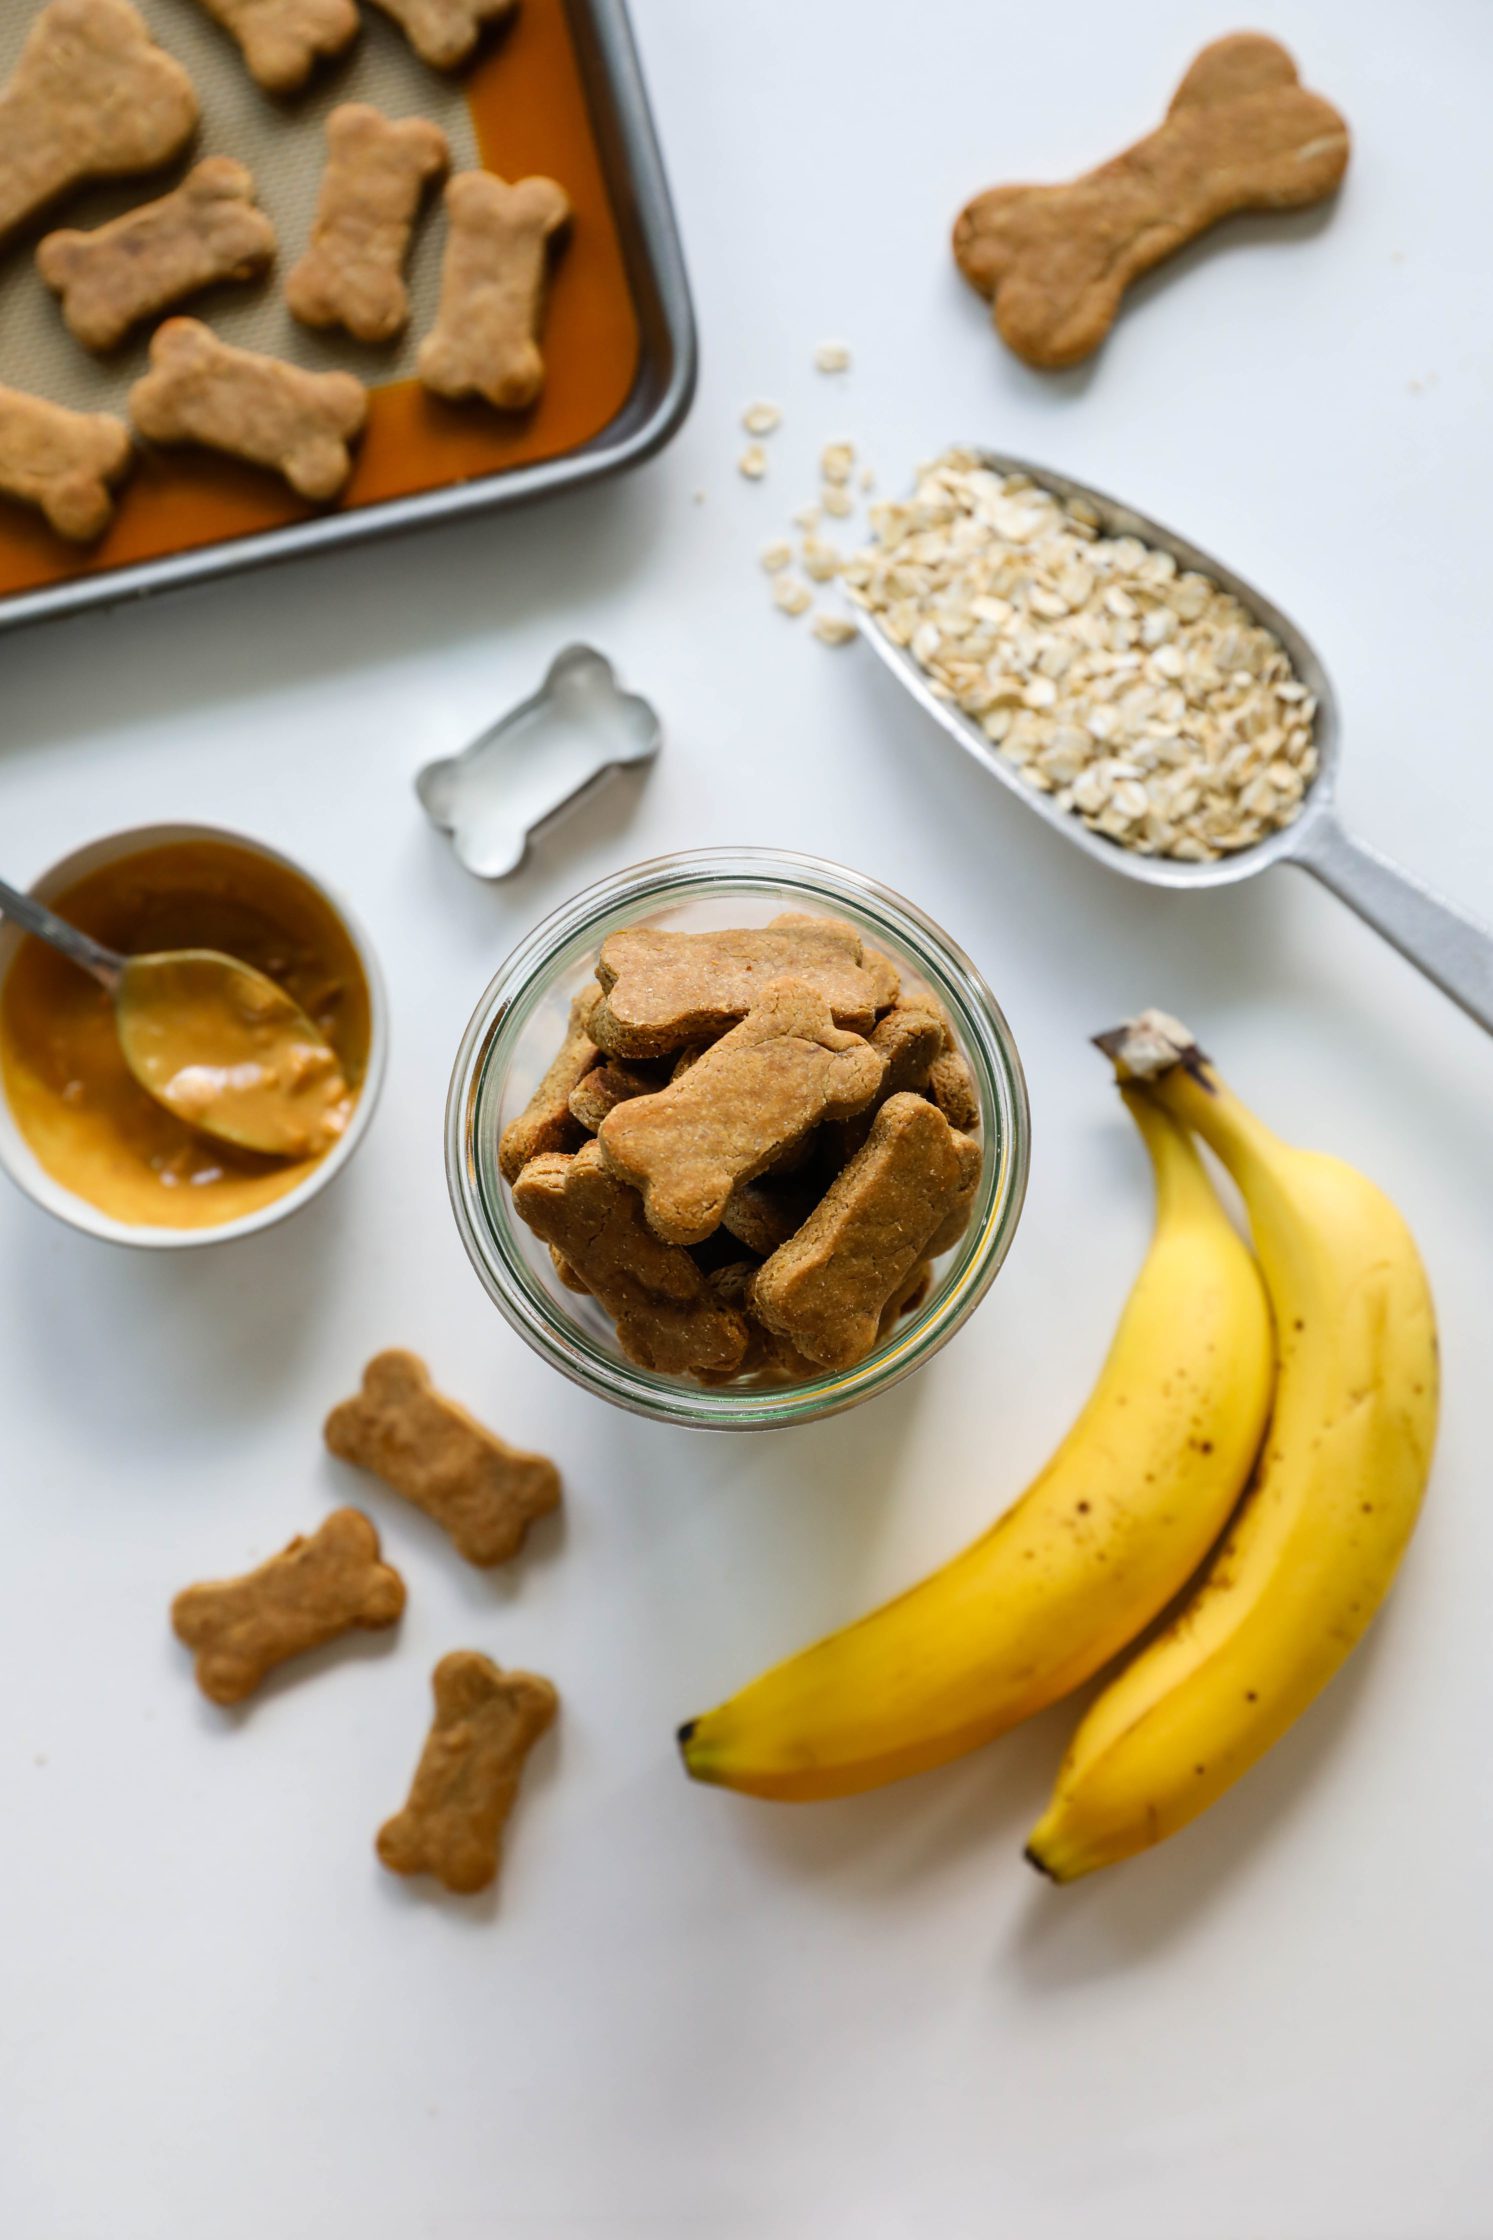 DIY KONG Filling for Dogs: Peanut Butter, Banana, and Coconut Oil